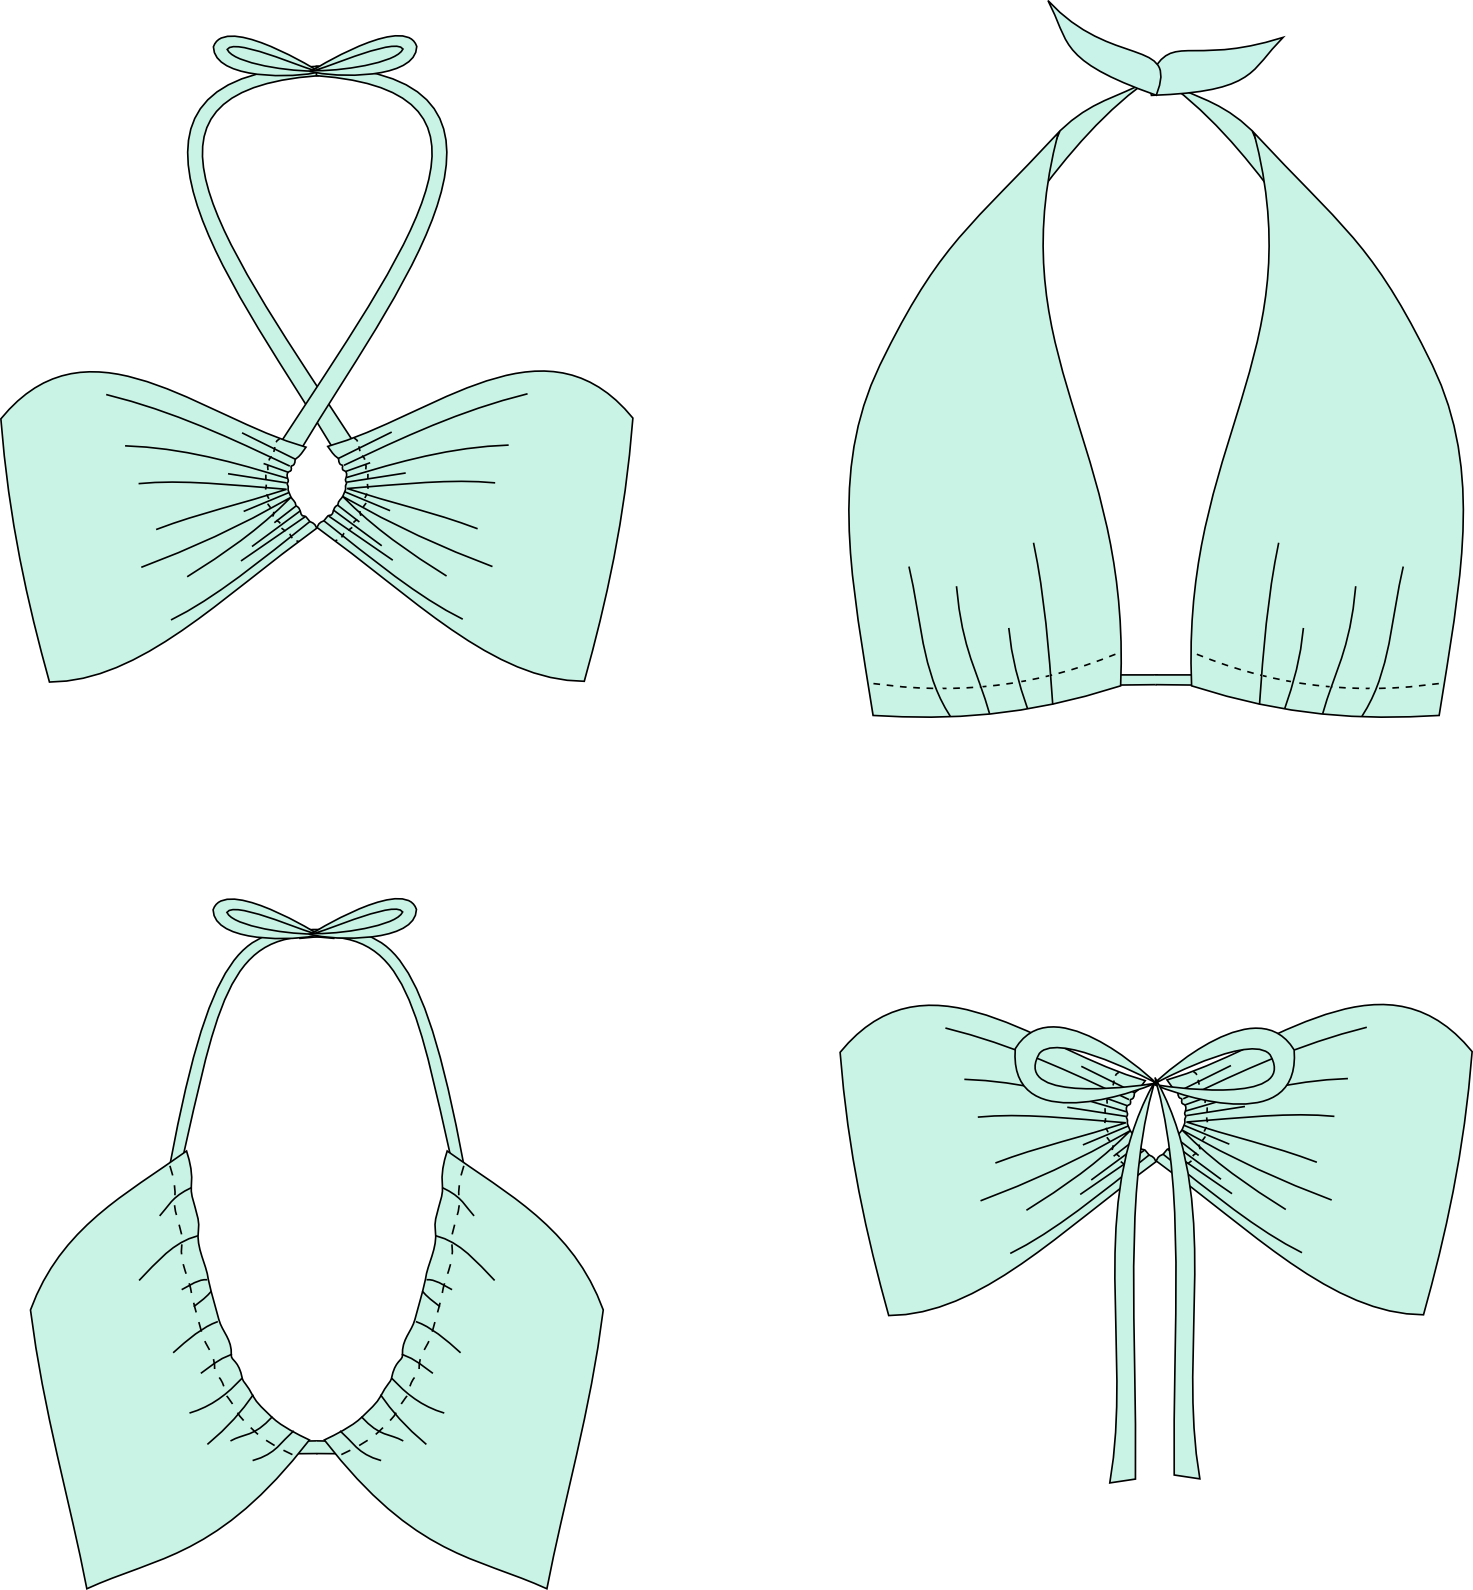 sewing clipart couture